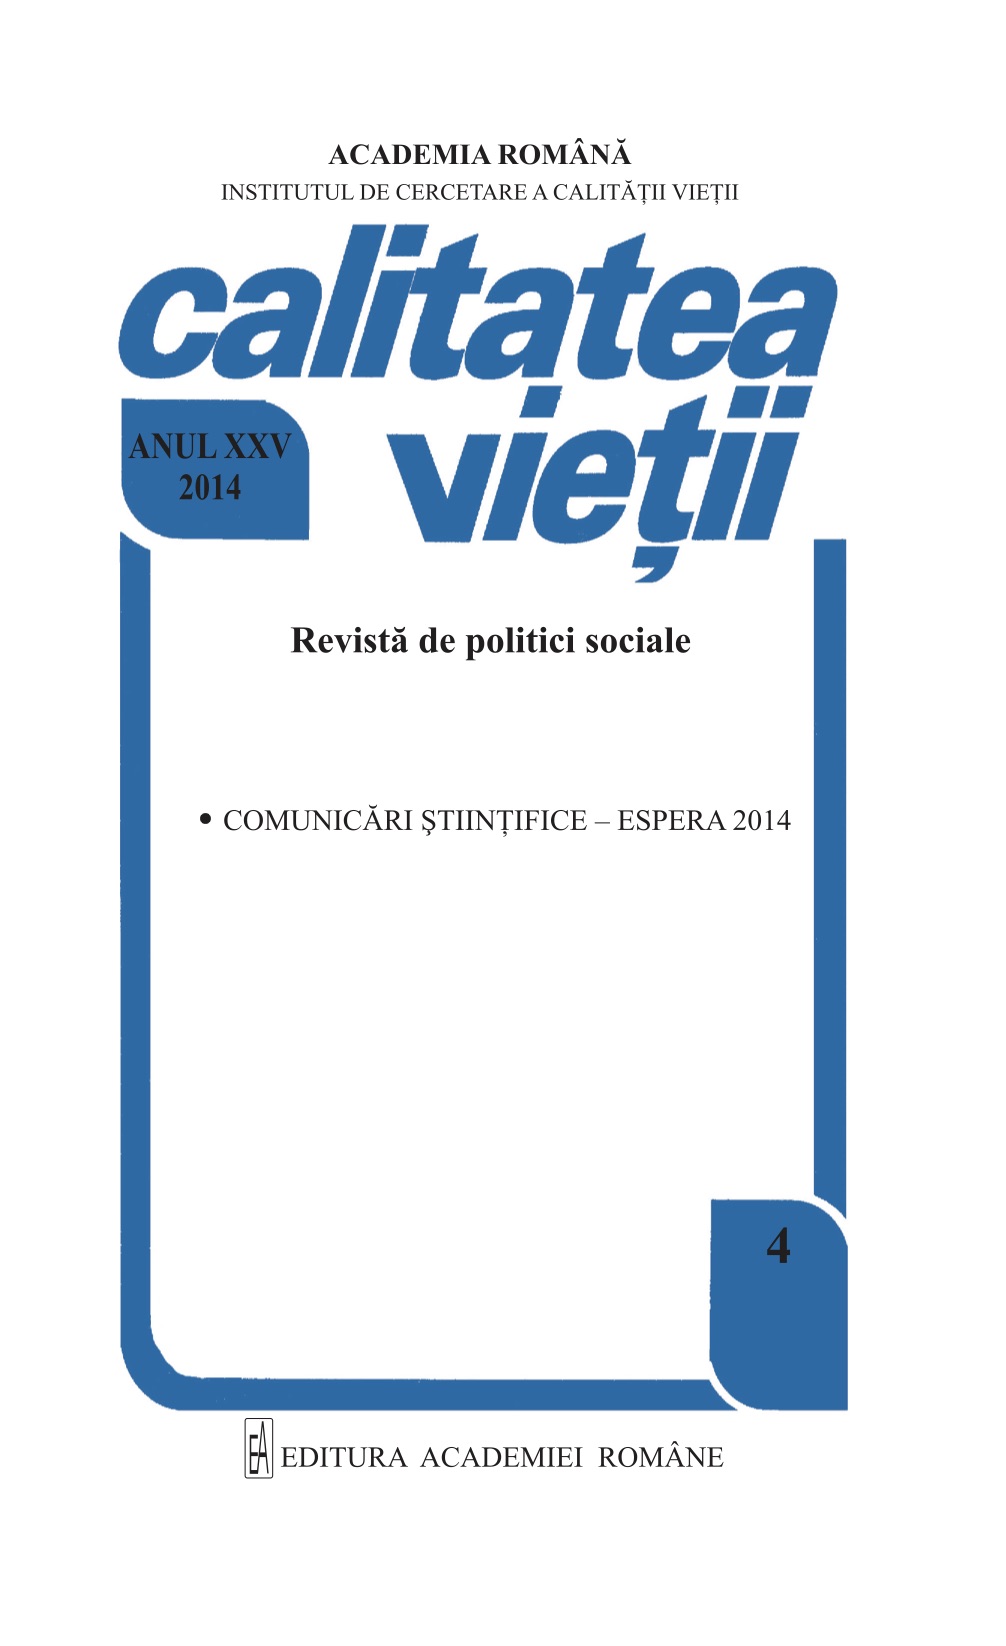 International negotiations as strategic factors with influence on the configuration of the social policy in Romania Cover Image